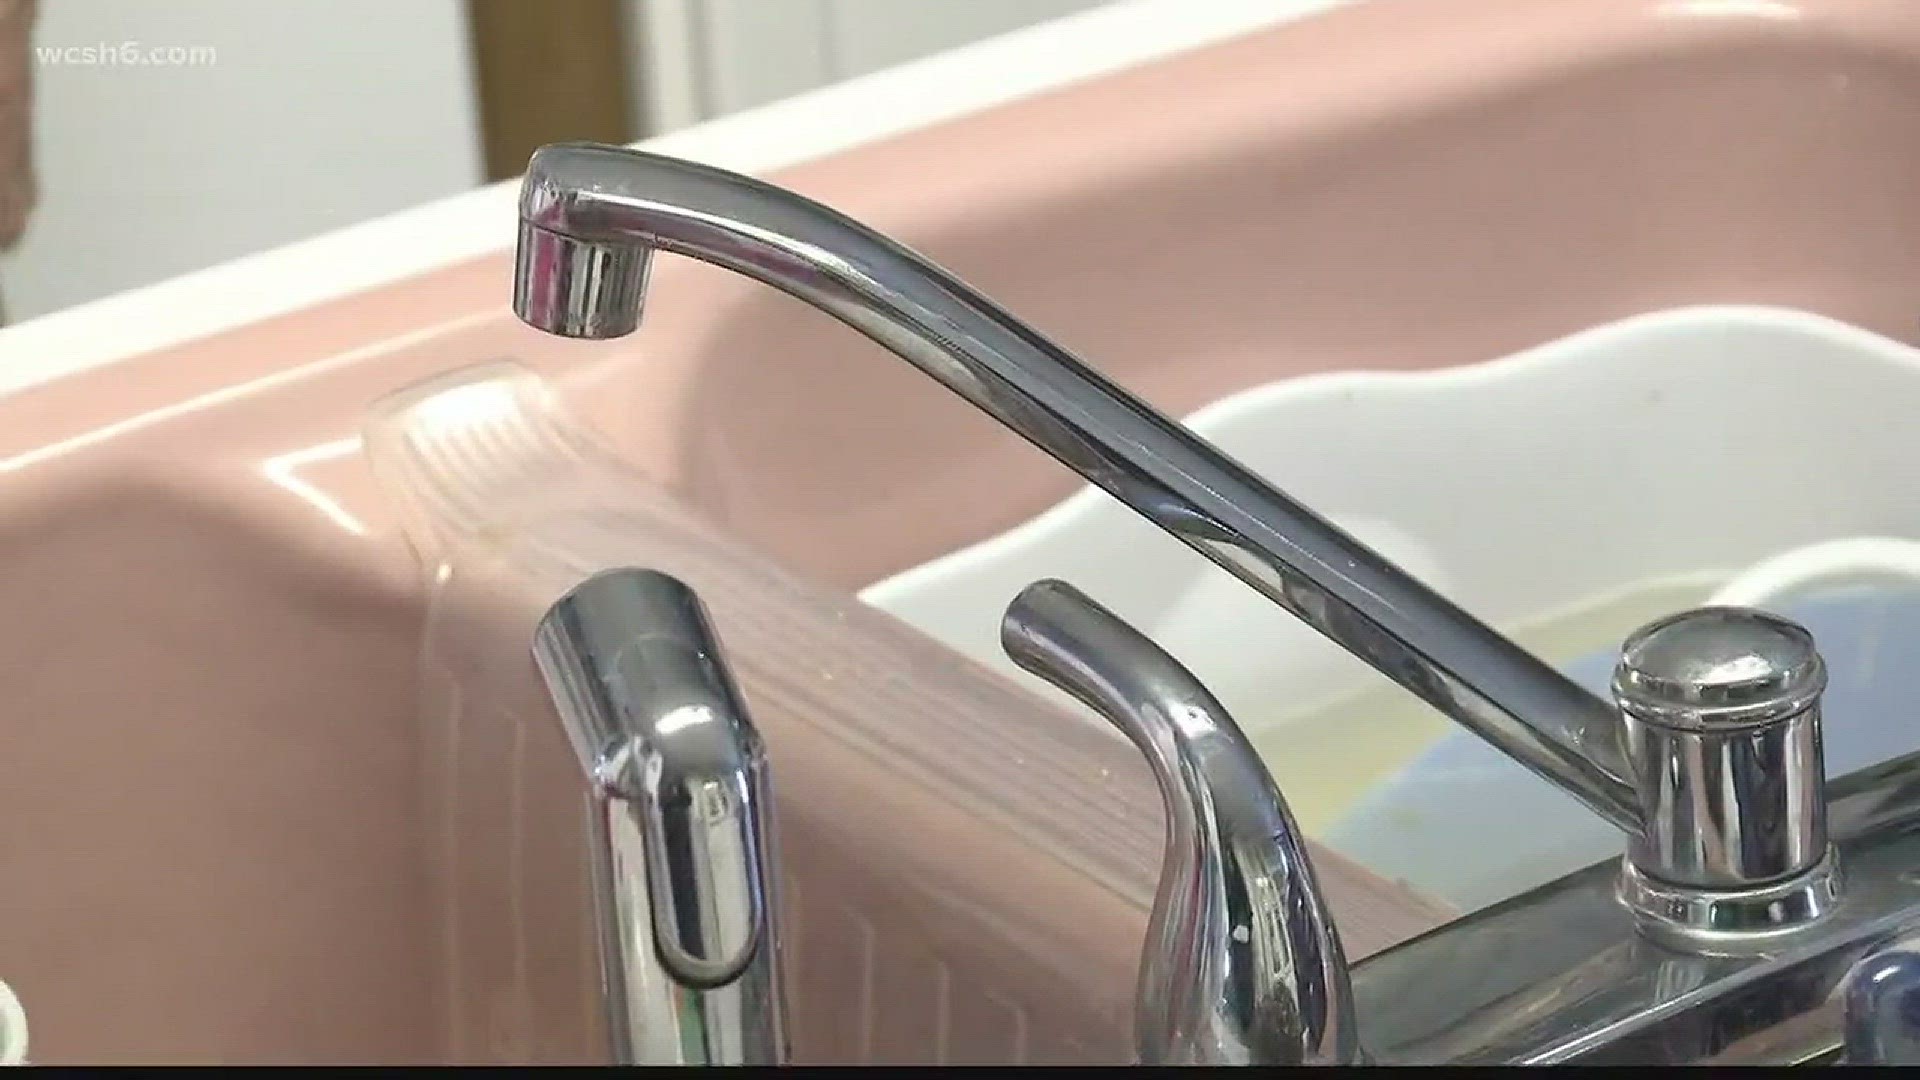 NOW: Brunswick mobile home tenants upset over lack of water